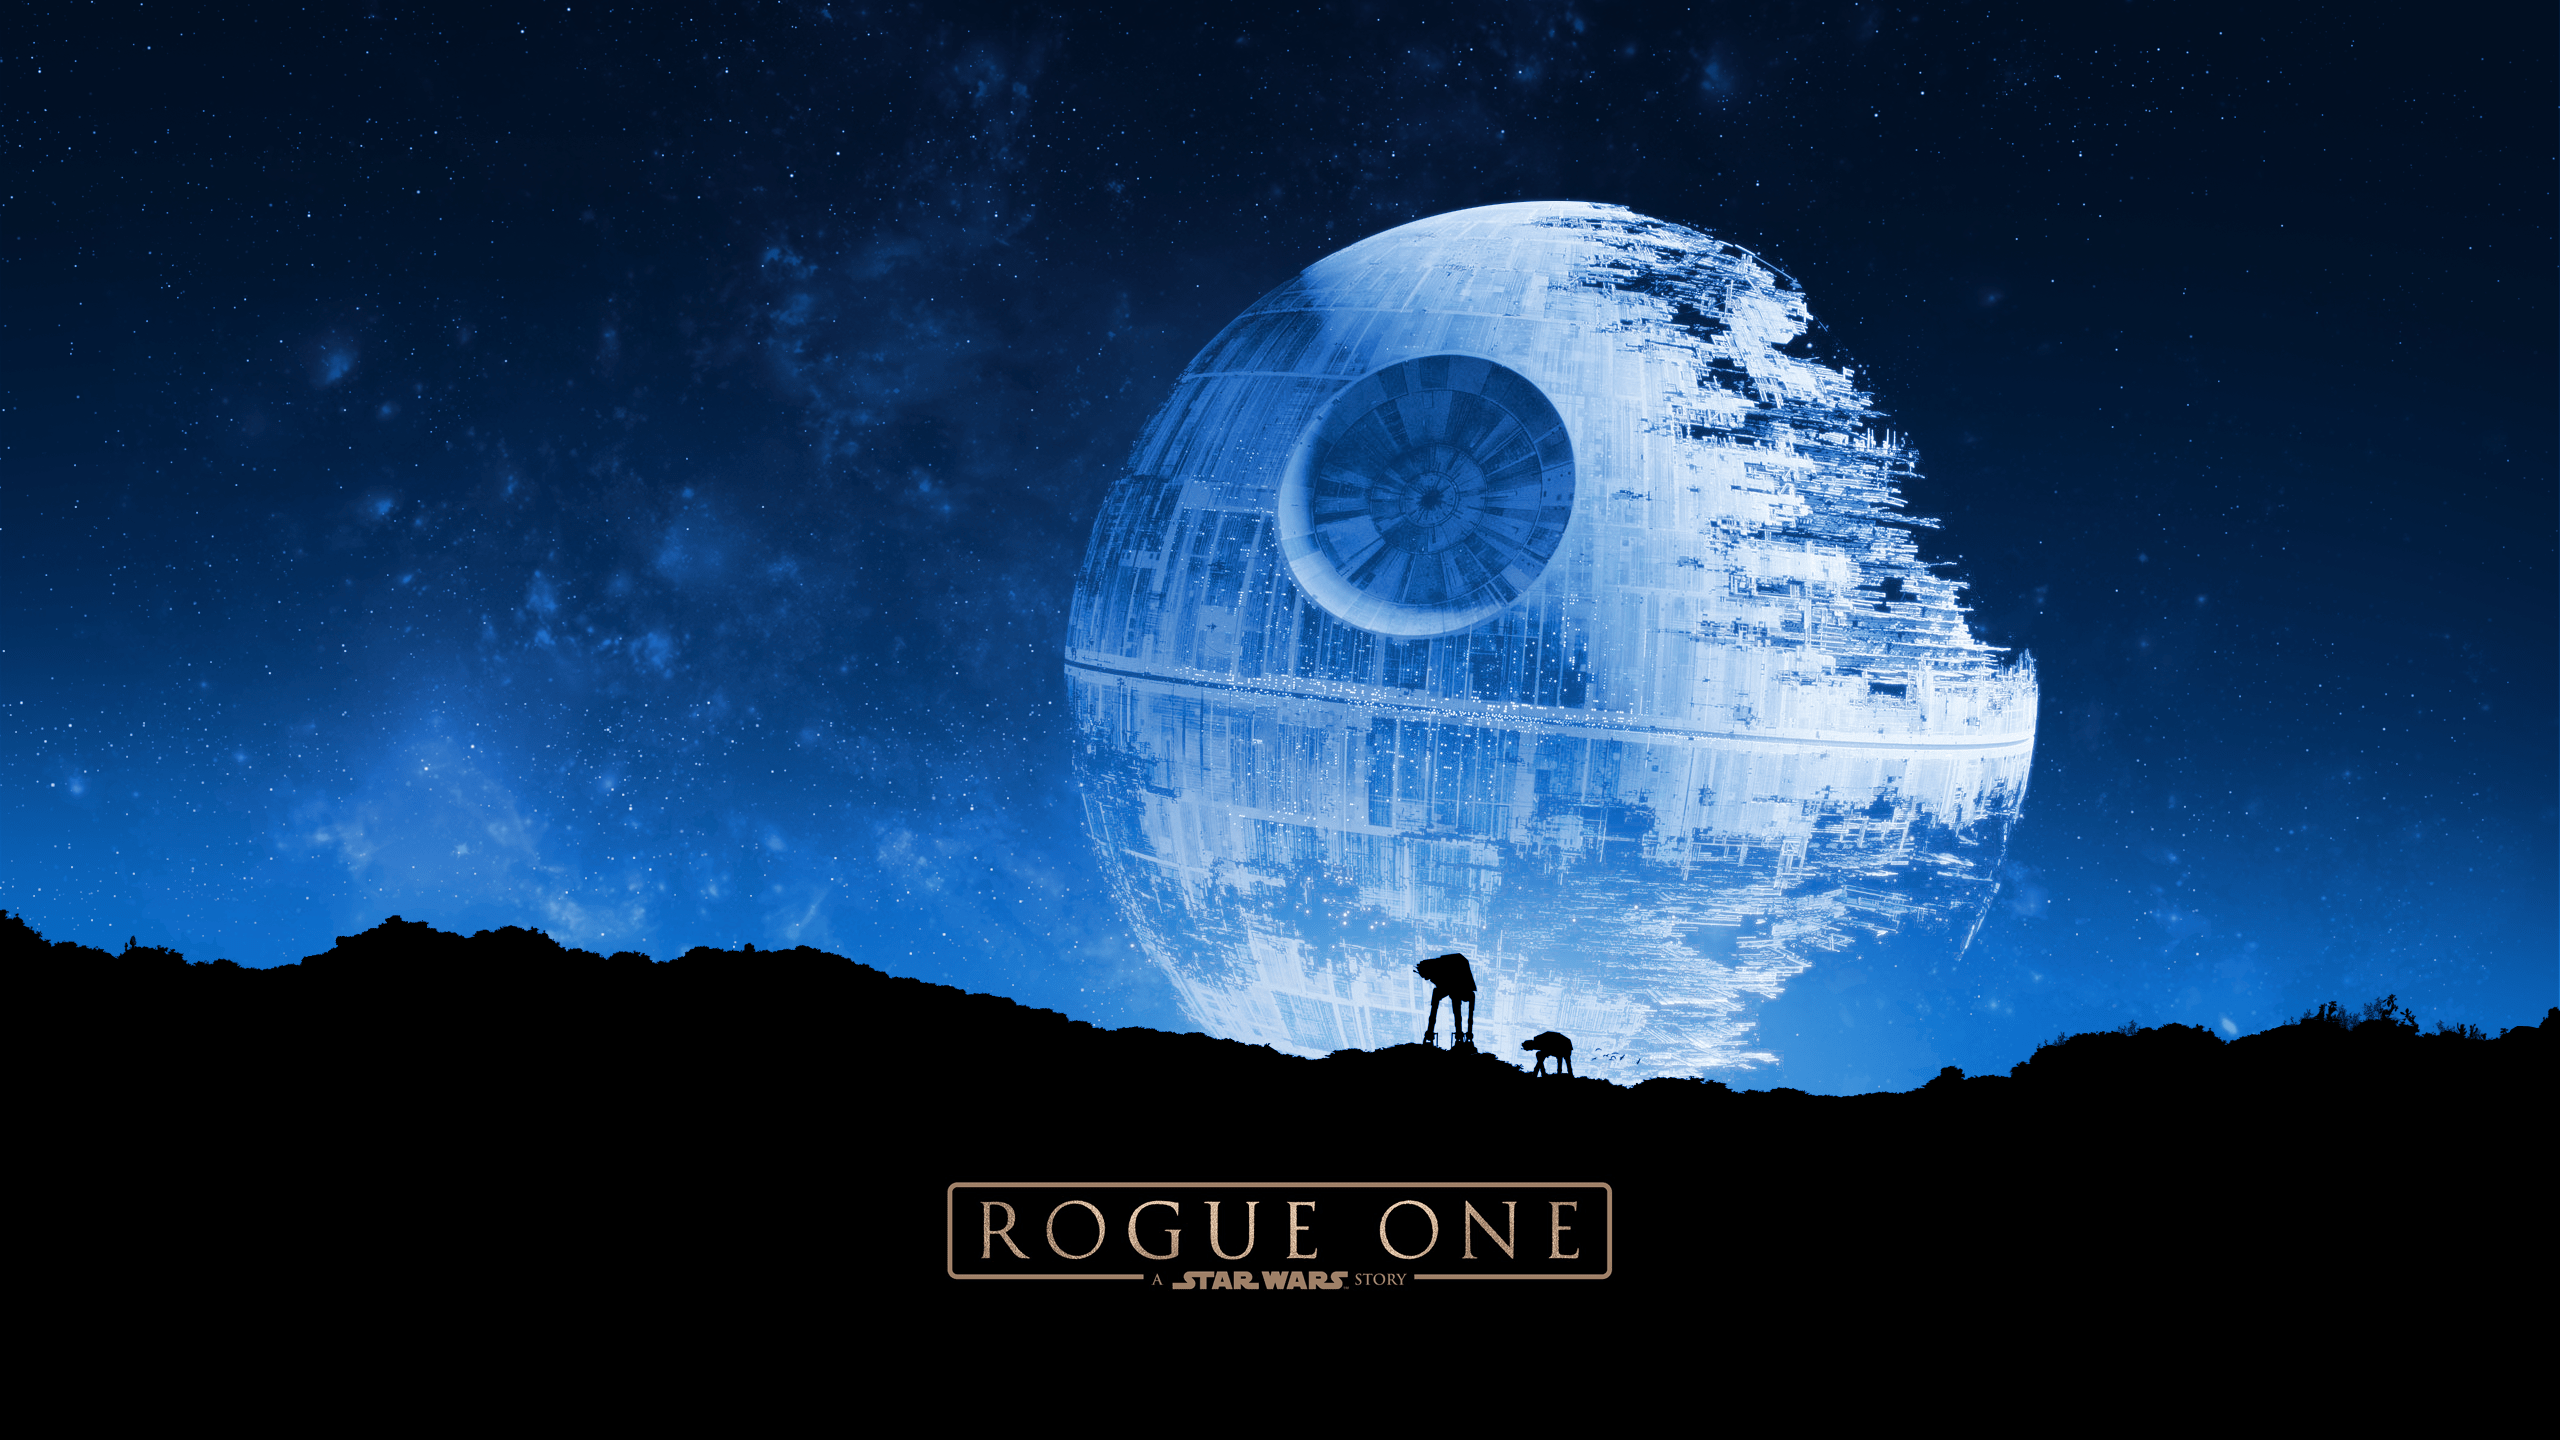 Death Star Rogue One Wallpapers Top Free Death Star Rogue One Backgrounds Wallpaperaccess